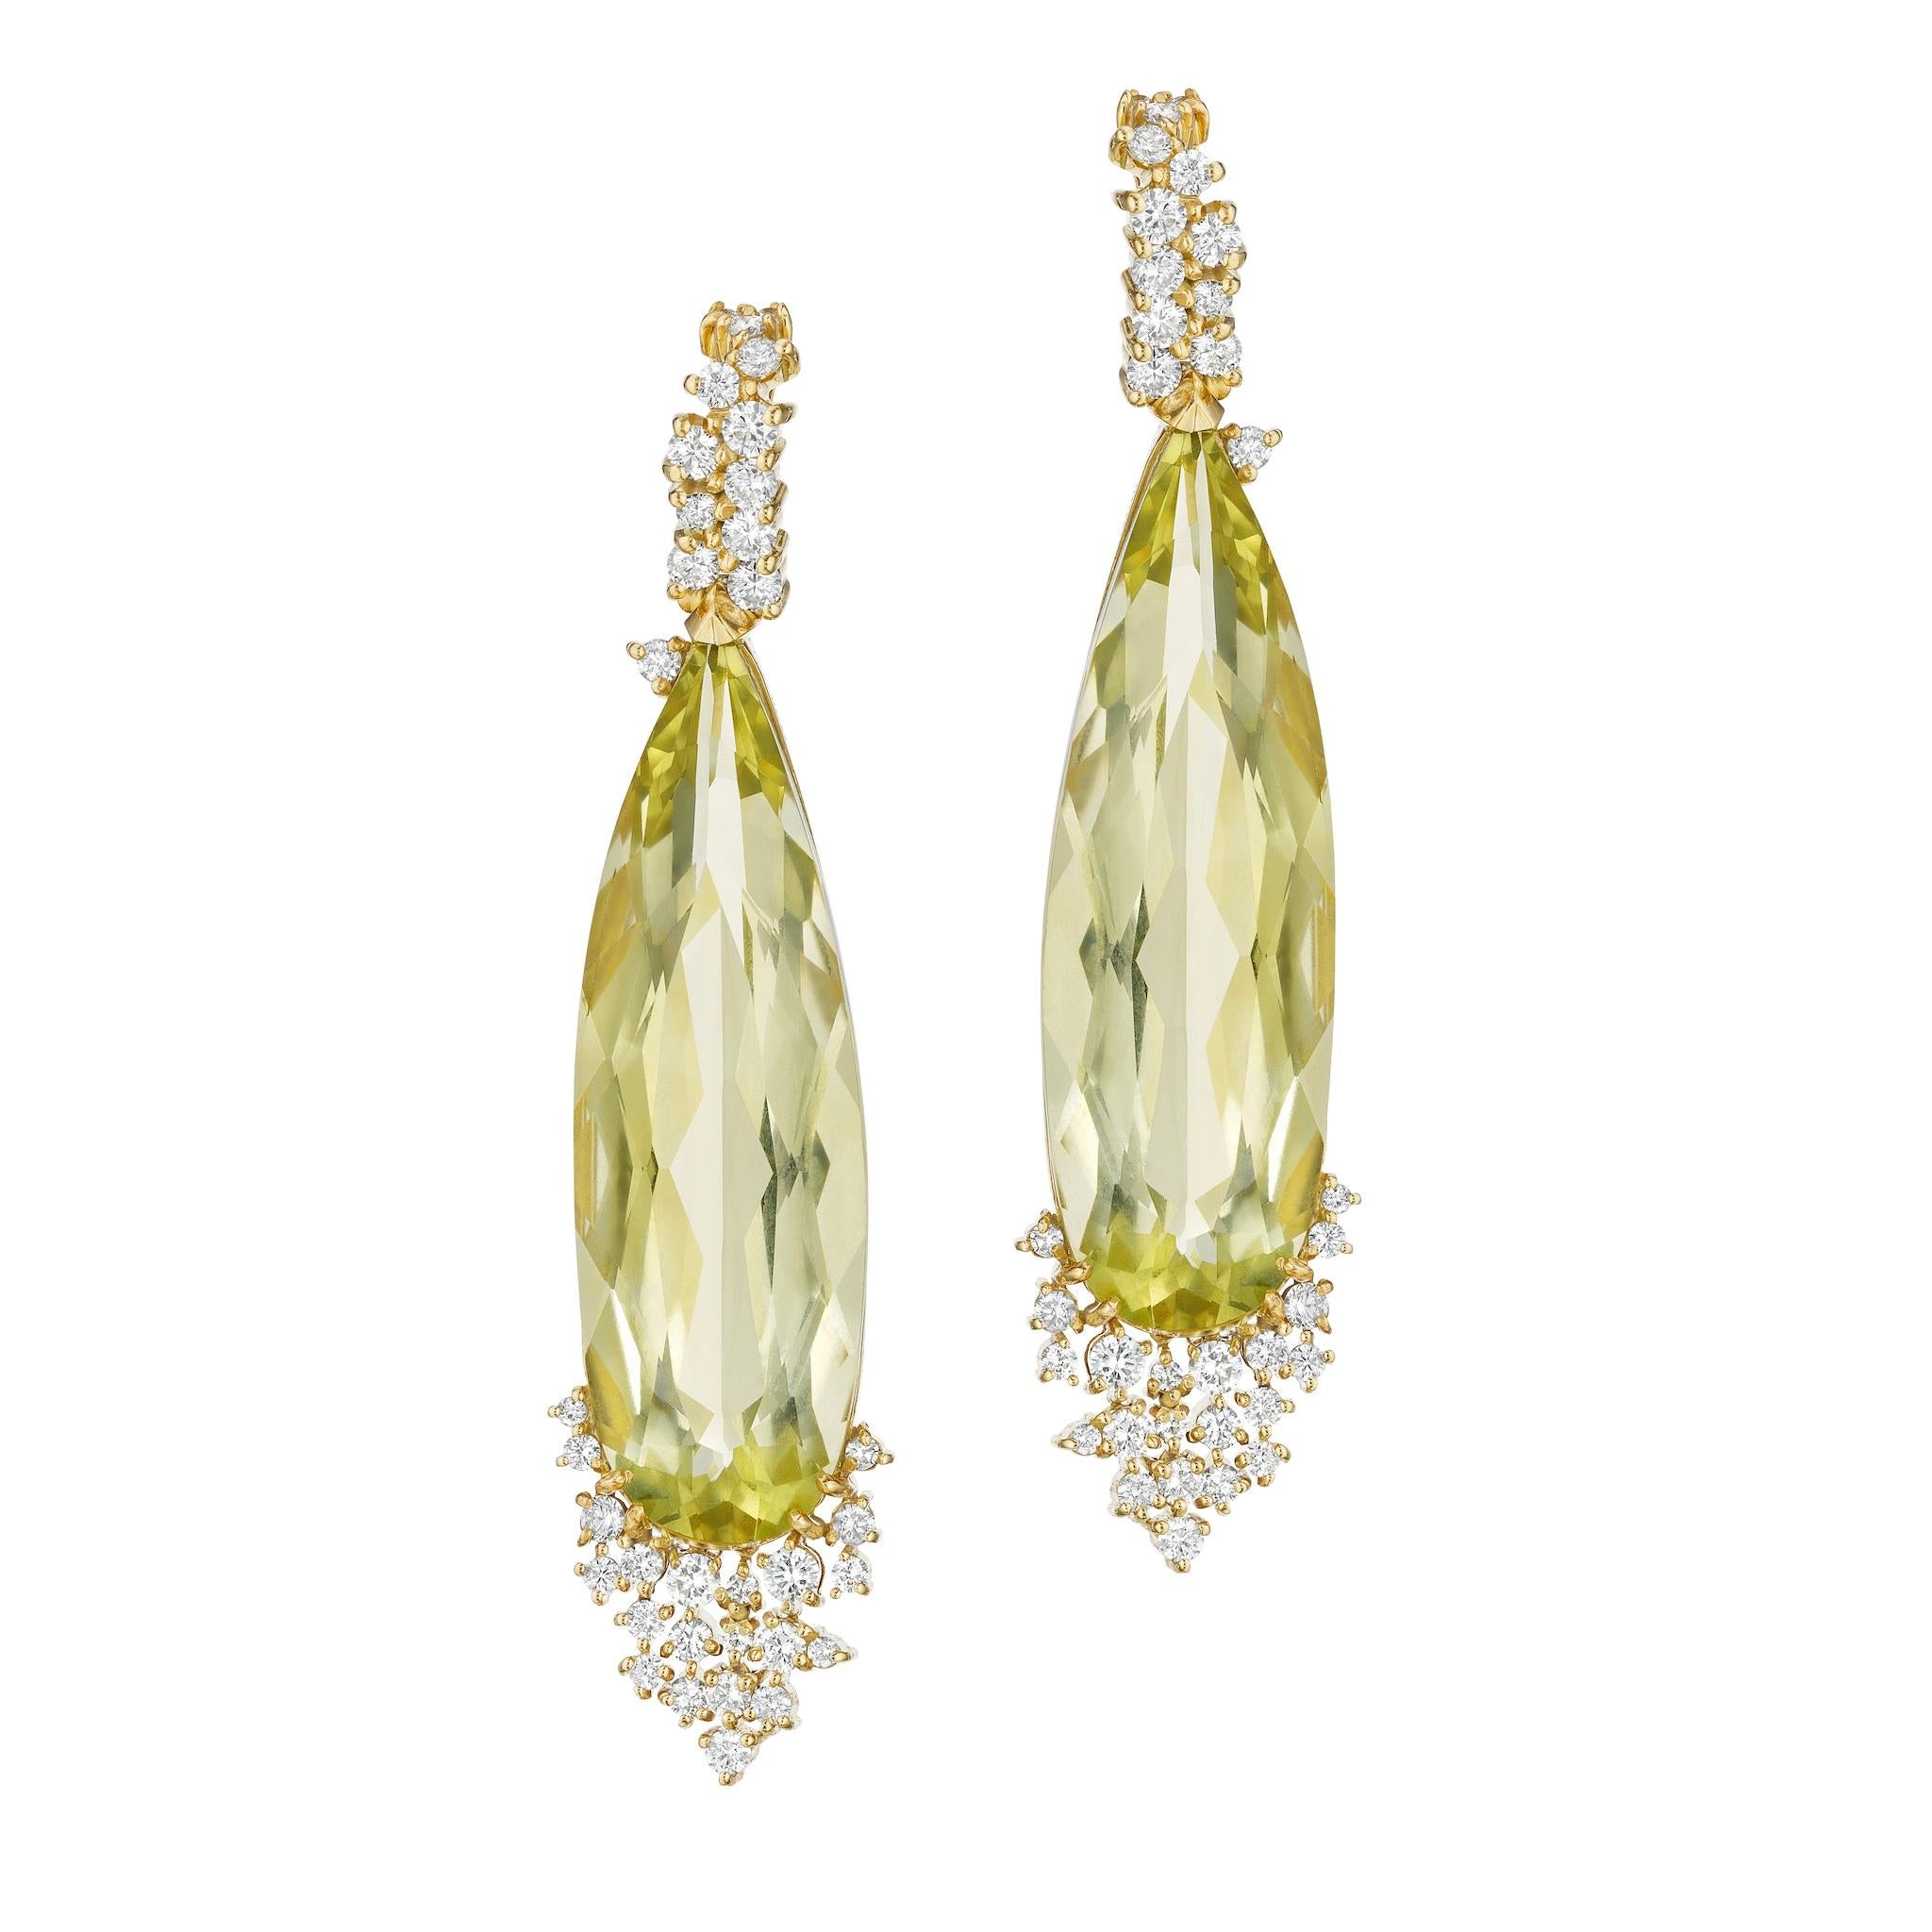 Specs: 18k yellow gold earrings with 48 total carats of lemon citrine, 1.50 carats in diamonds.

Story: The Melting Ice collection by Madstone designer Kerri Halpern draws influence from its colorful gemstones creating playful designs.

A